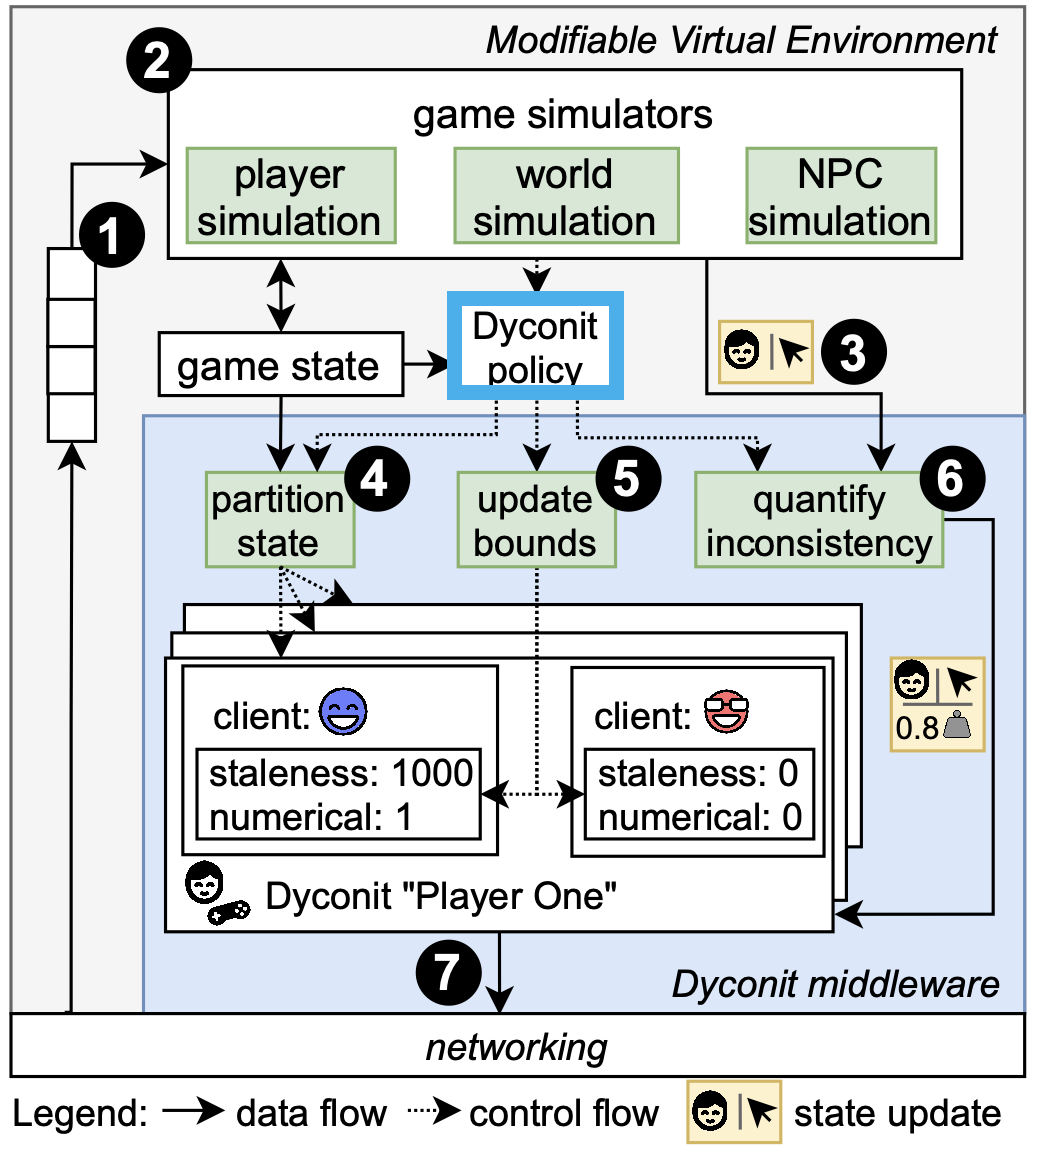 Dyconit system